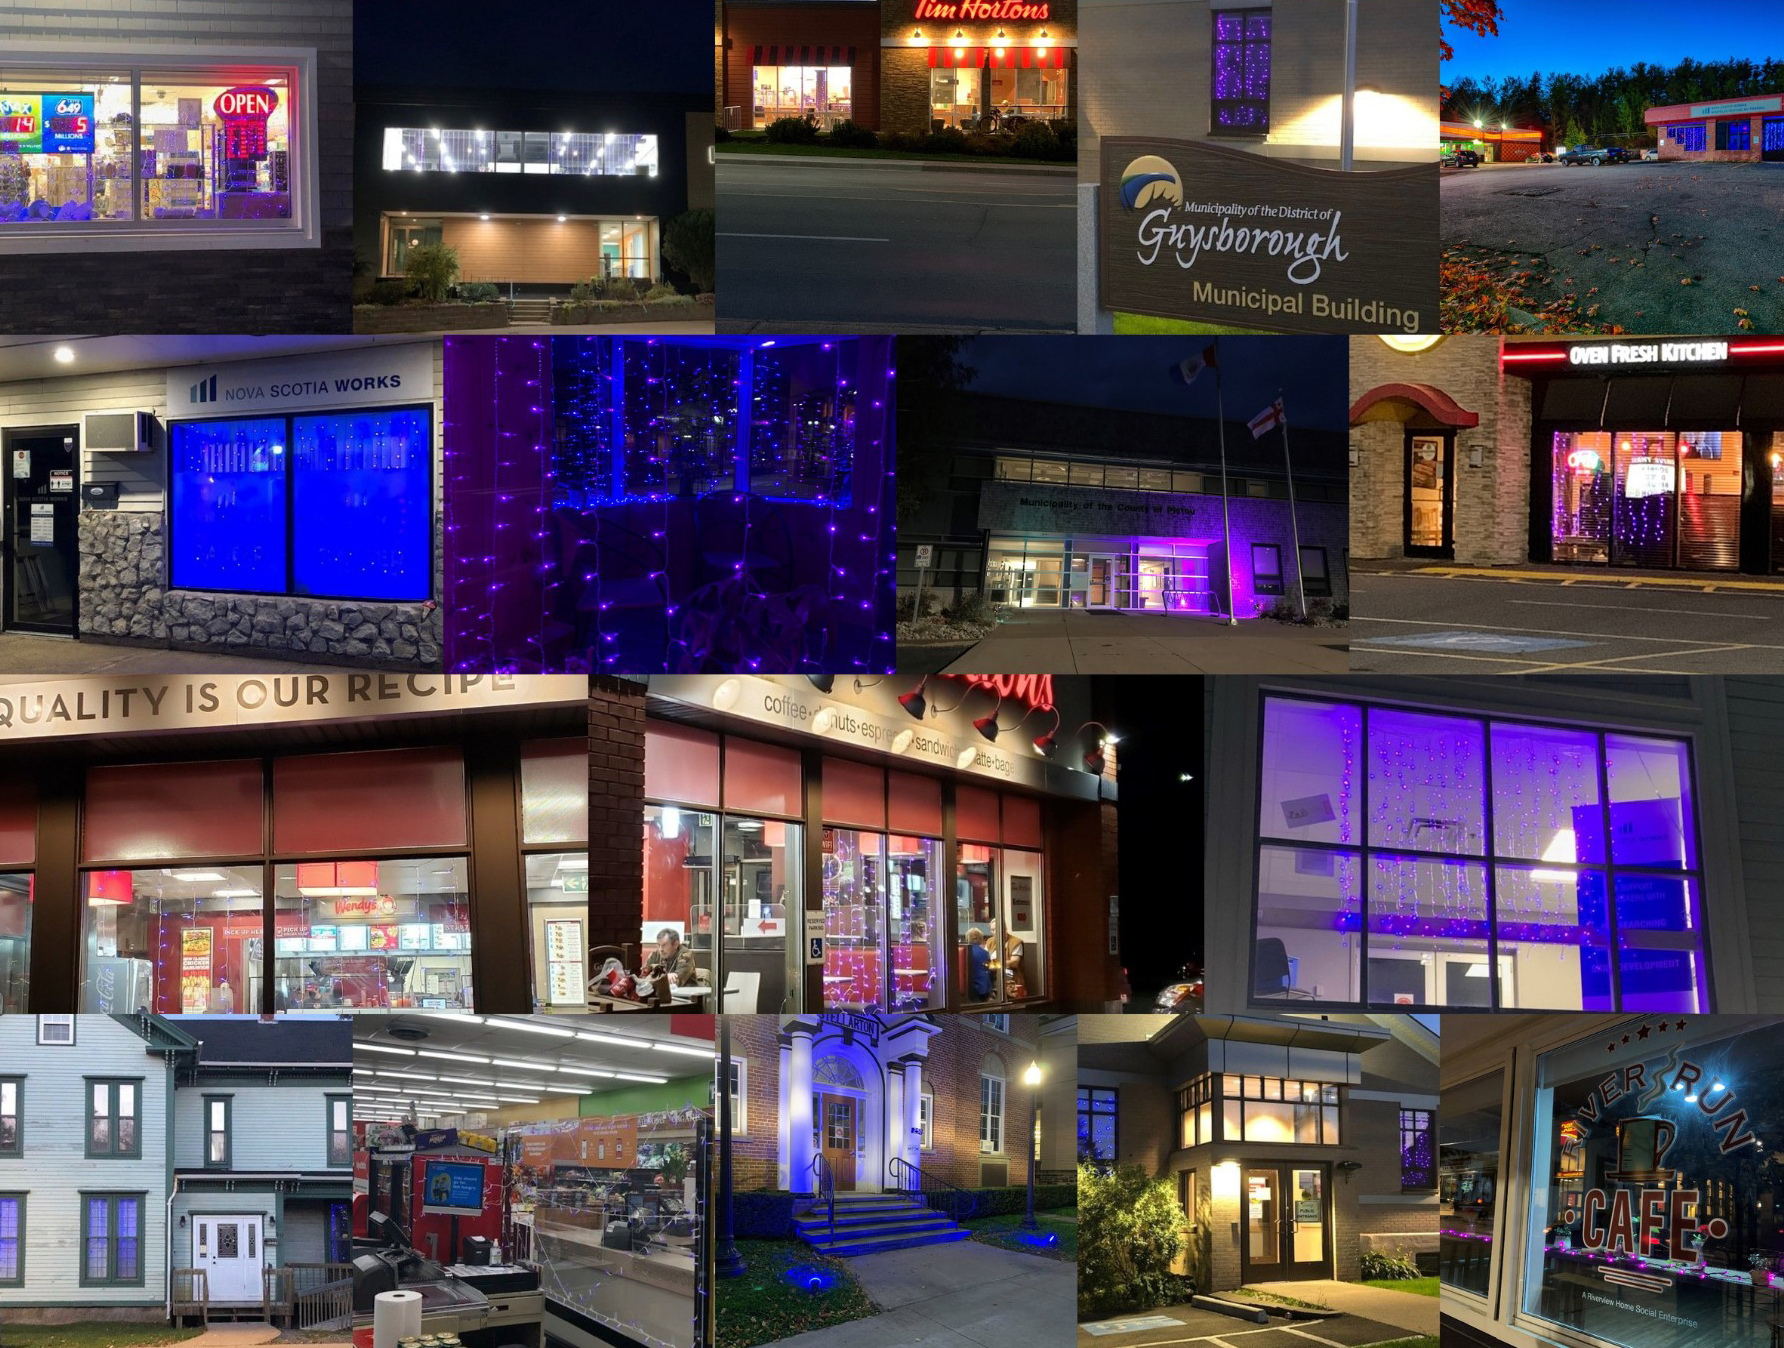 A busy collage image of 16 local businesses in Guysborough, Nova Scotia. Businesses have their windows lit purple and blue.